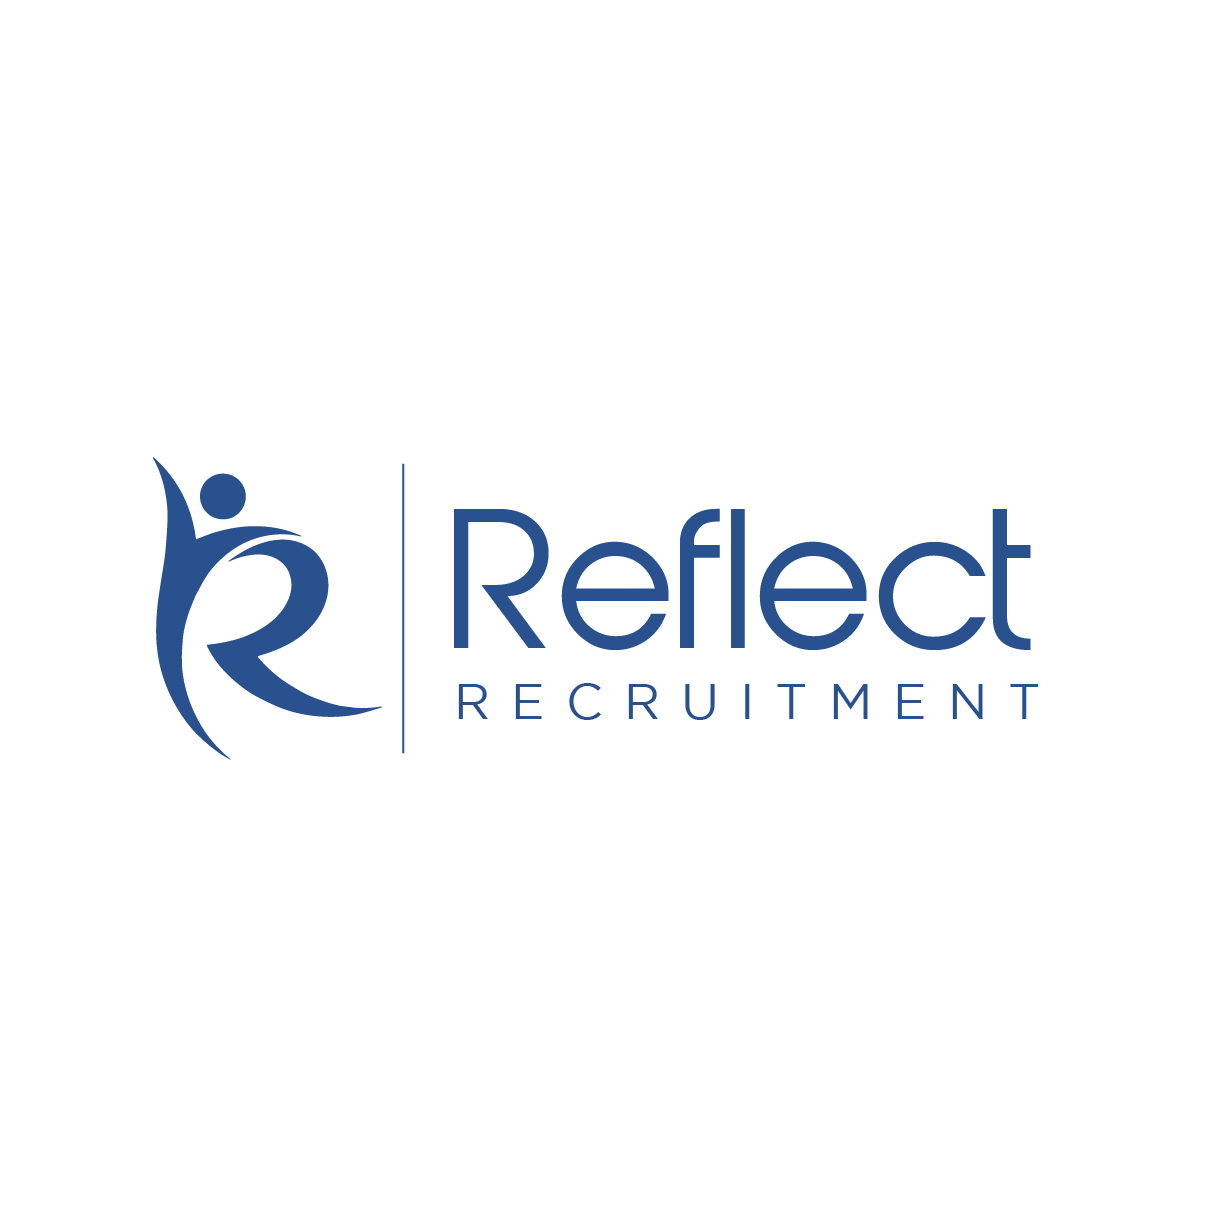 40 Recruitment Logos to Get in Your Team | BrandCrowd blog